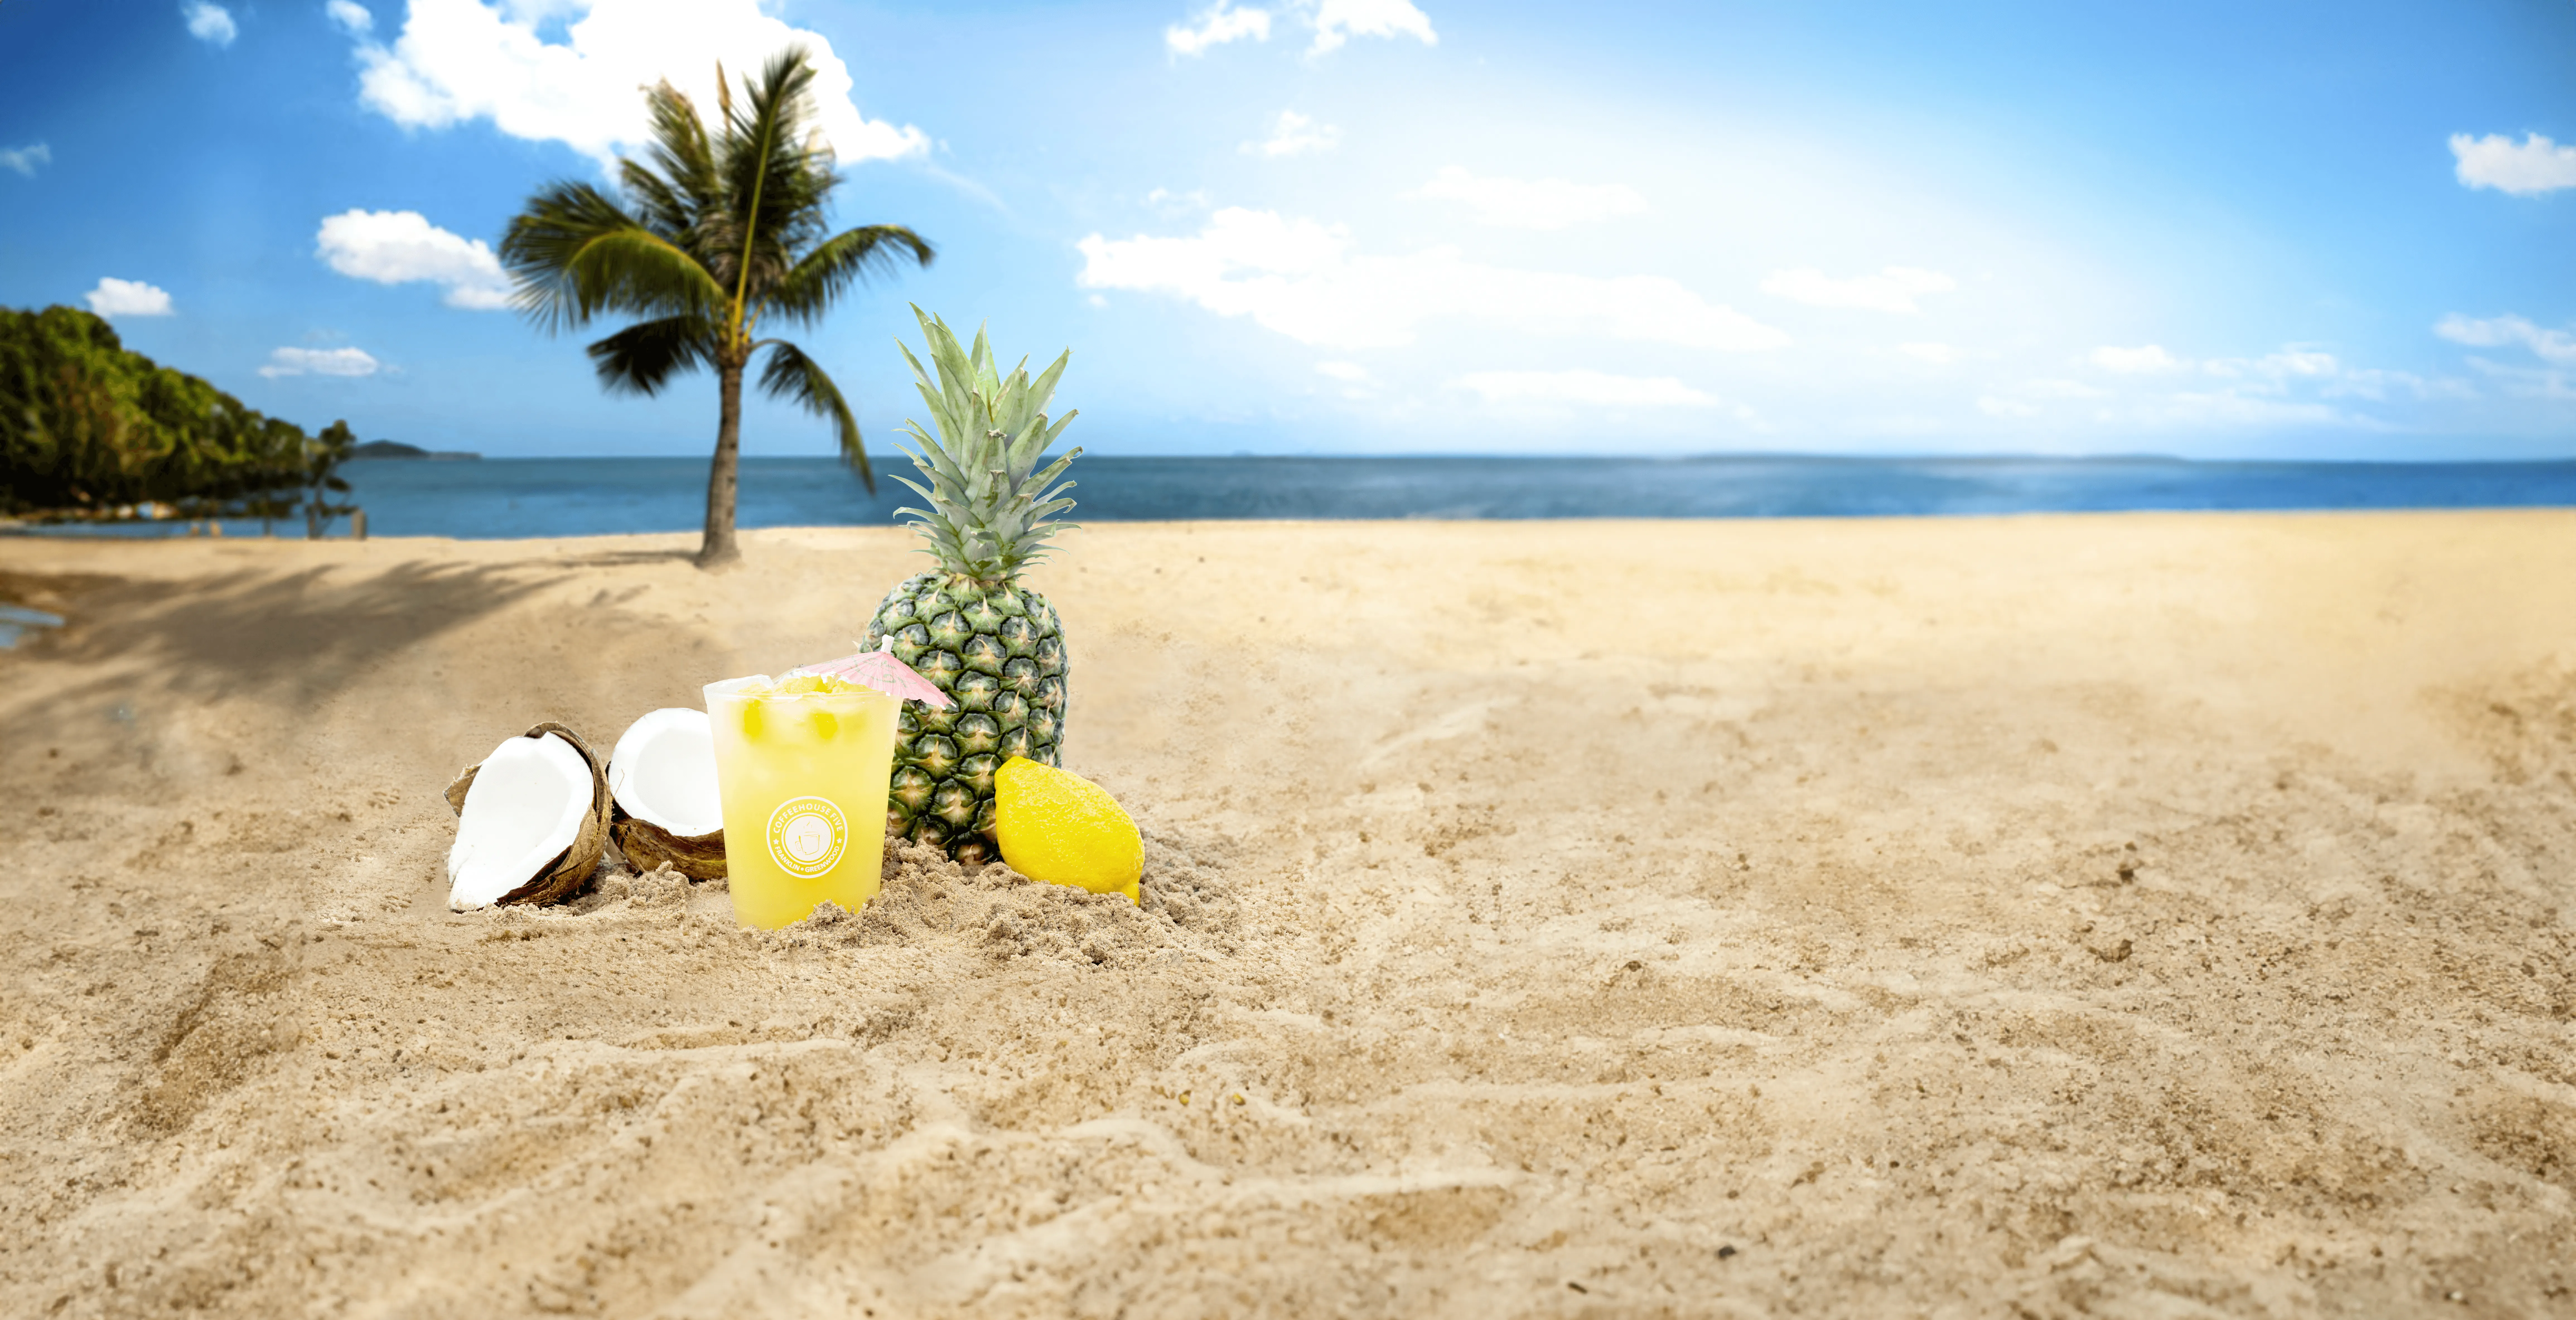 Tropical beach scene with a pineapple, coconut halves, a glass of lemonade, and a lemon slice on the sand, palm tree and blue sky in the background.